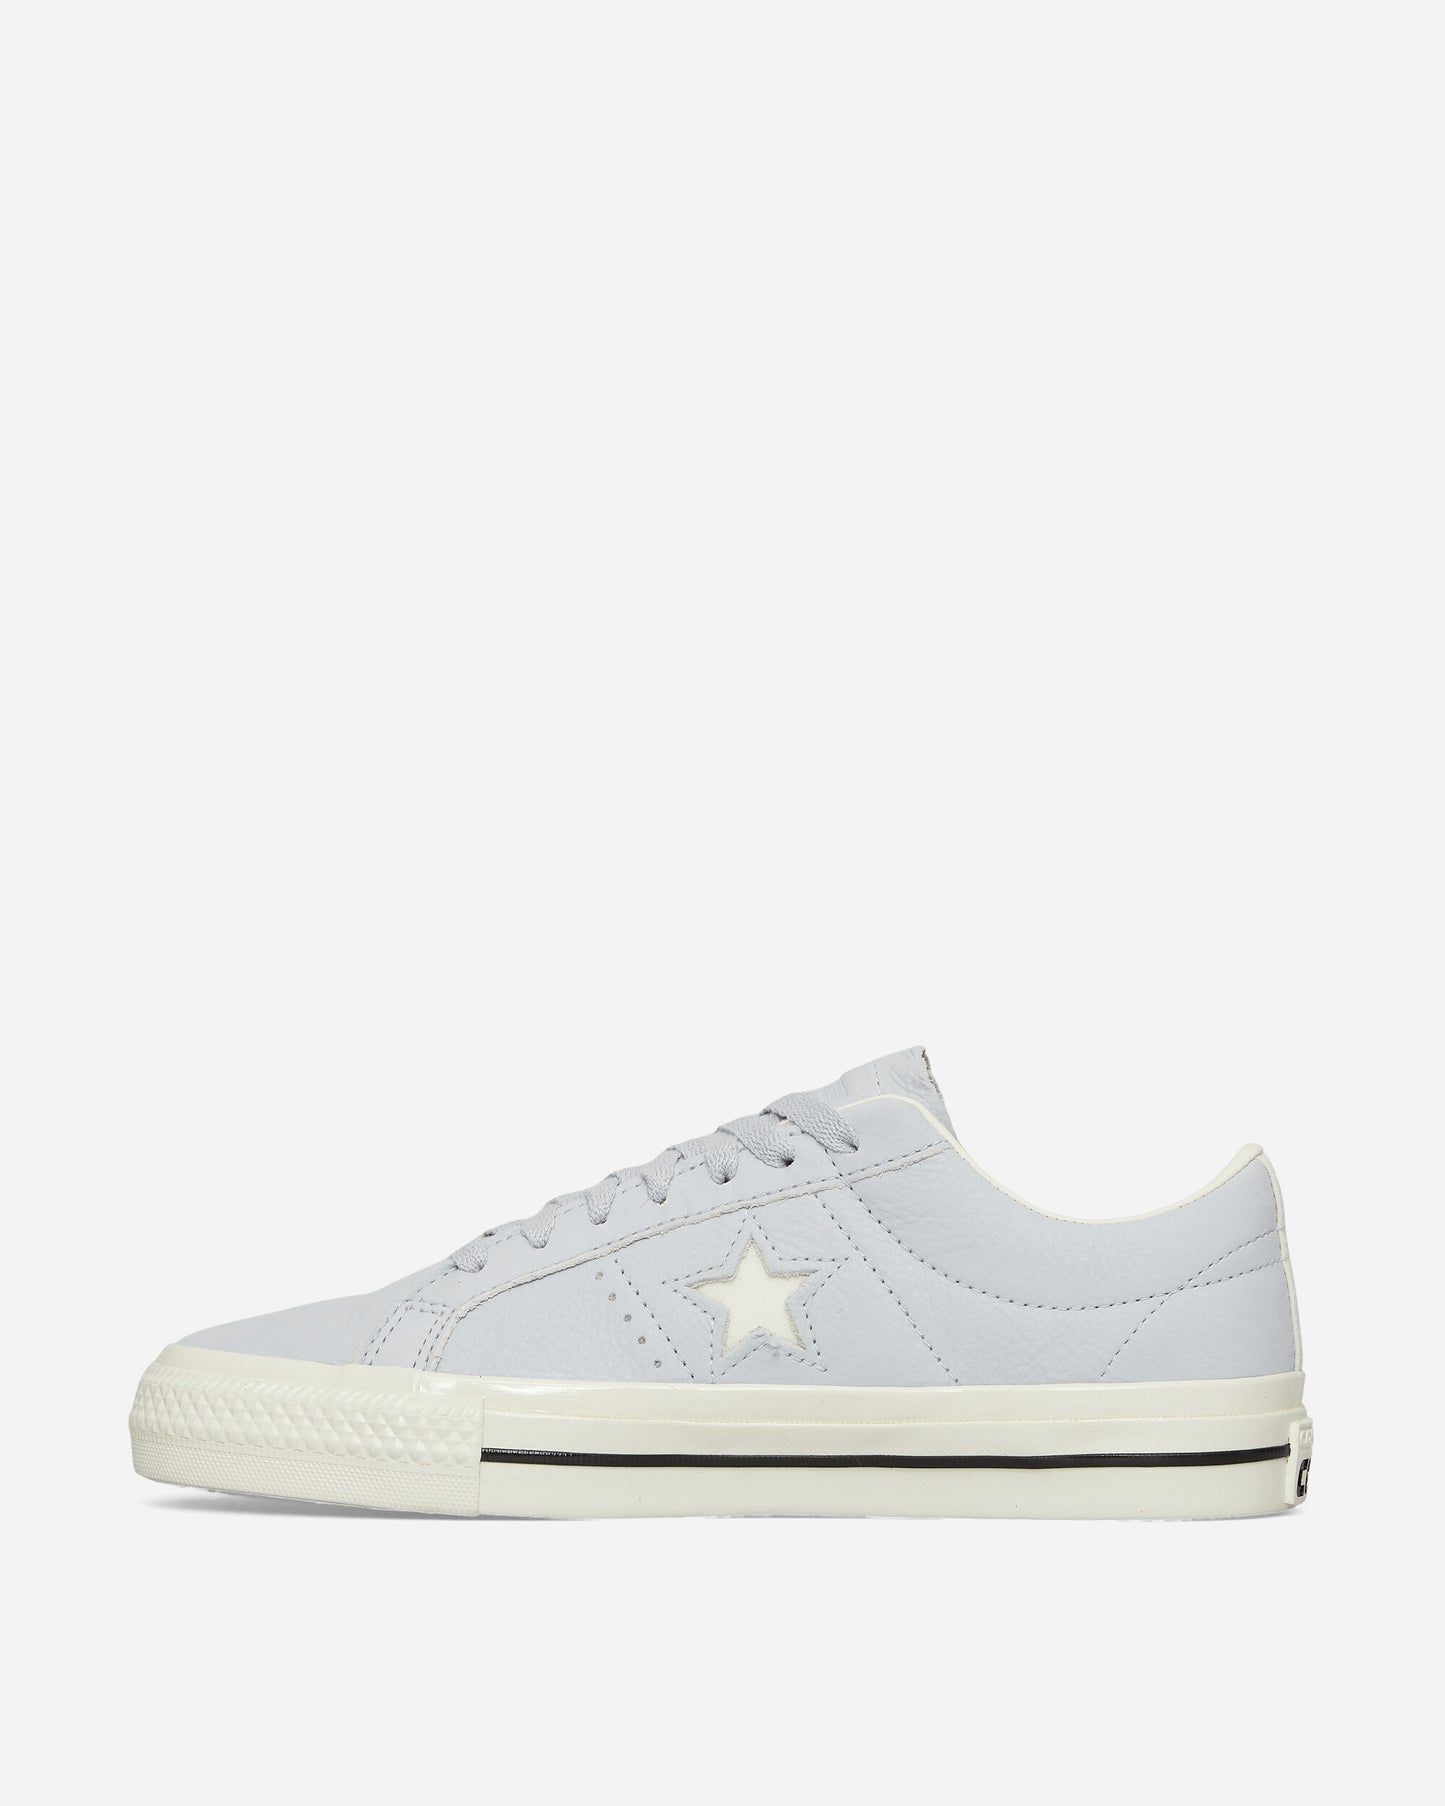 Converse One Star Pro Ghosted/Egret/Black Sneakers Low A02942C